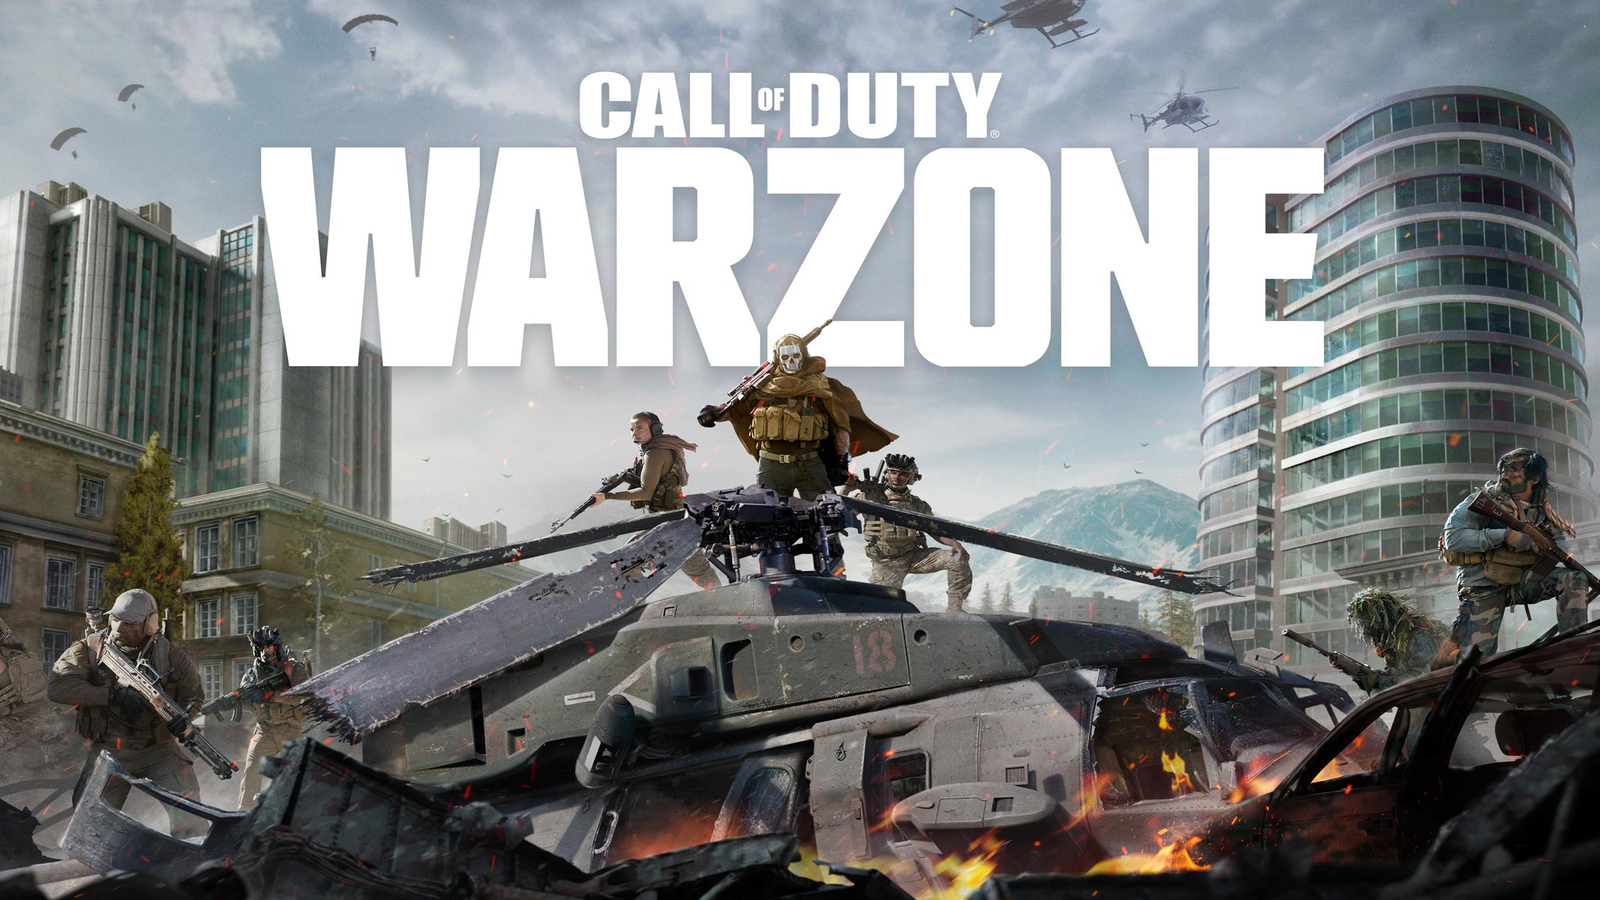 PlayStation Plus users get a free Call of Duty: Warzone Combat Pack